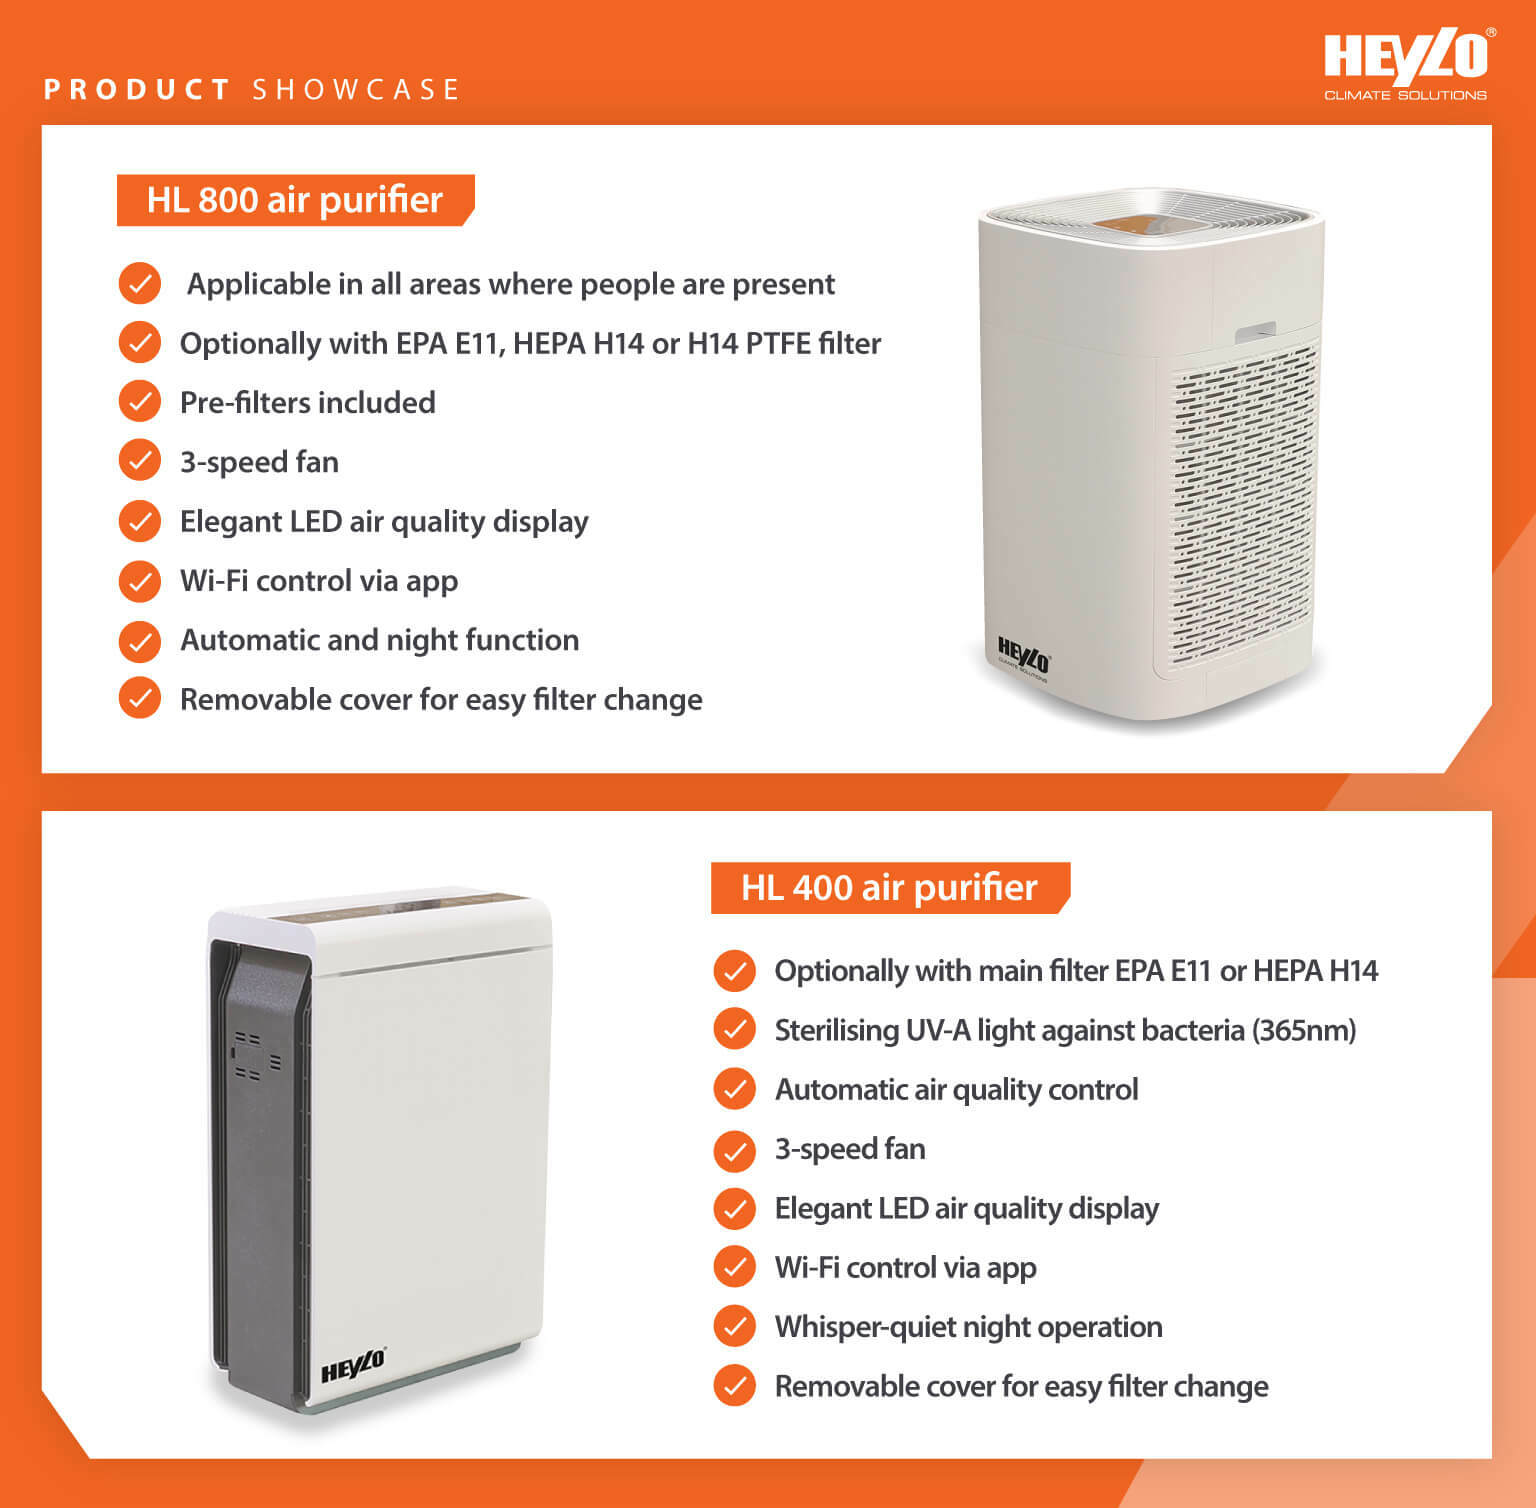 Heylo air purifier product showcase and features of the HL 800 and HL 400 series - Infographic image